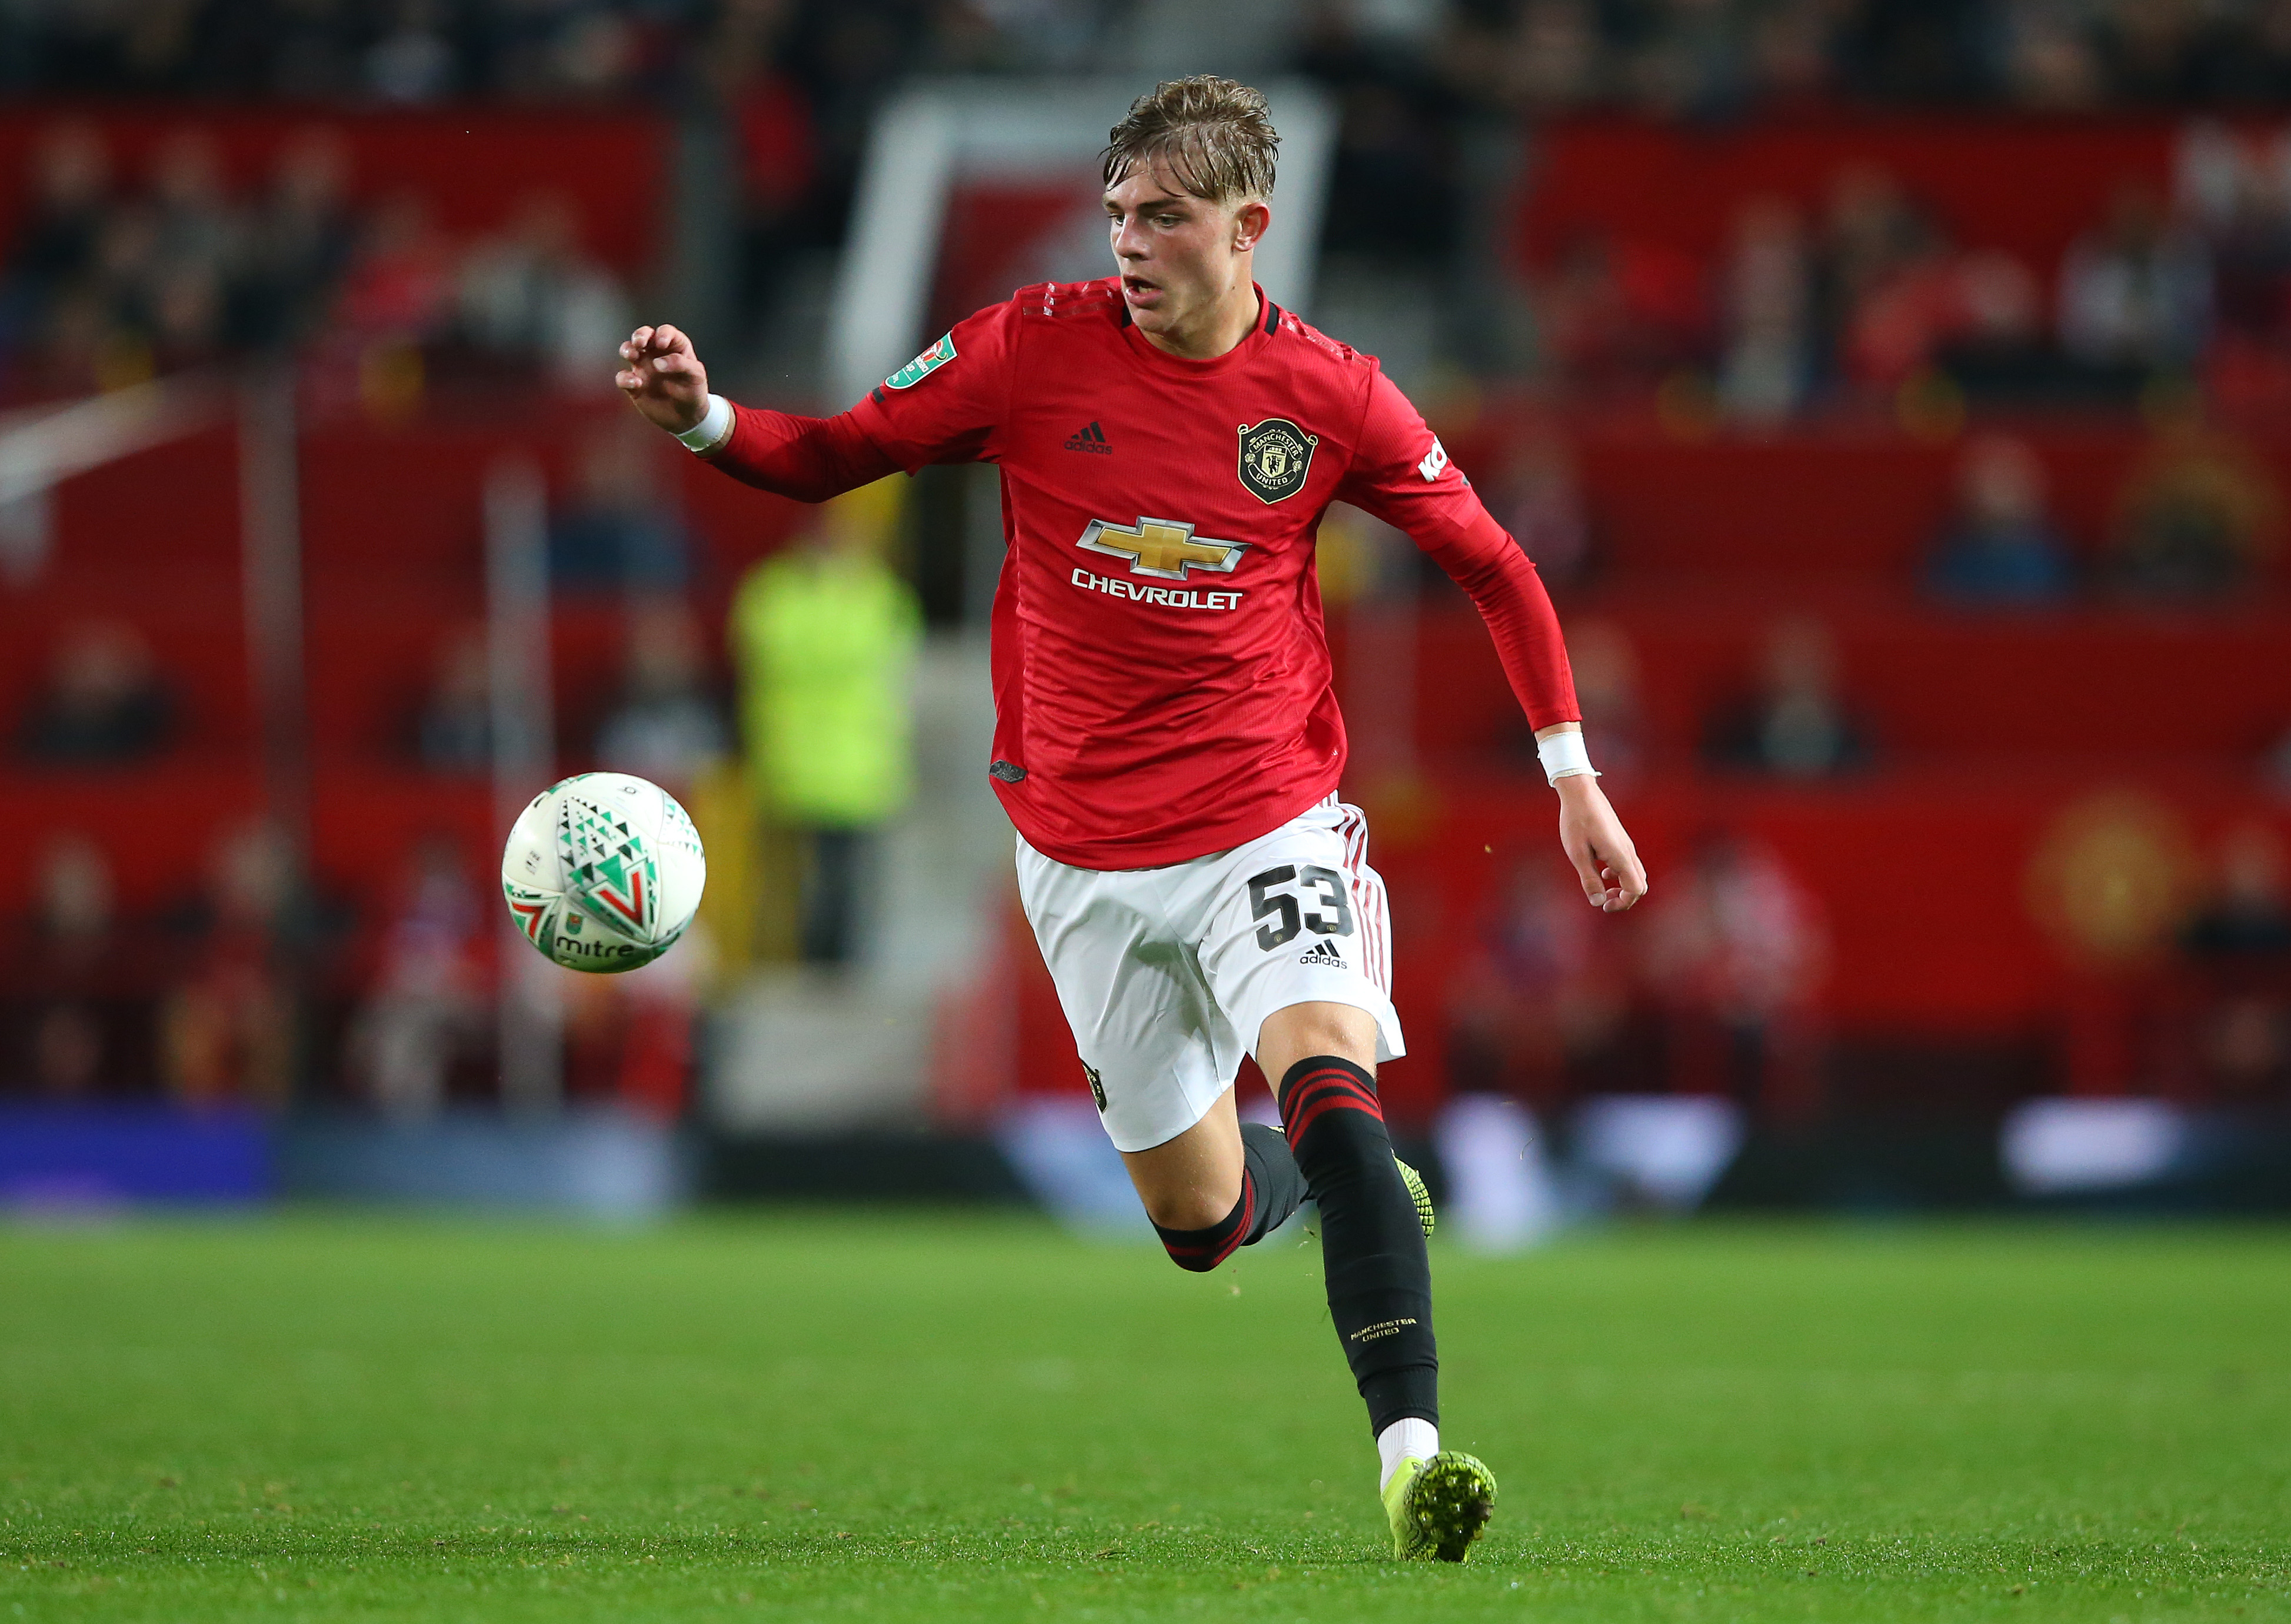 MANCHESTER, ENGLAND - SEPTEMBER 25: Brandon Williams of Manchester United during the Carabao Cup Third Round match between Manchester United and Rochdale at Old Trafford on September 25, 2019 in Manchester, England. (Photo by Alex Livesey/Getty Images)